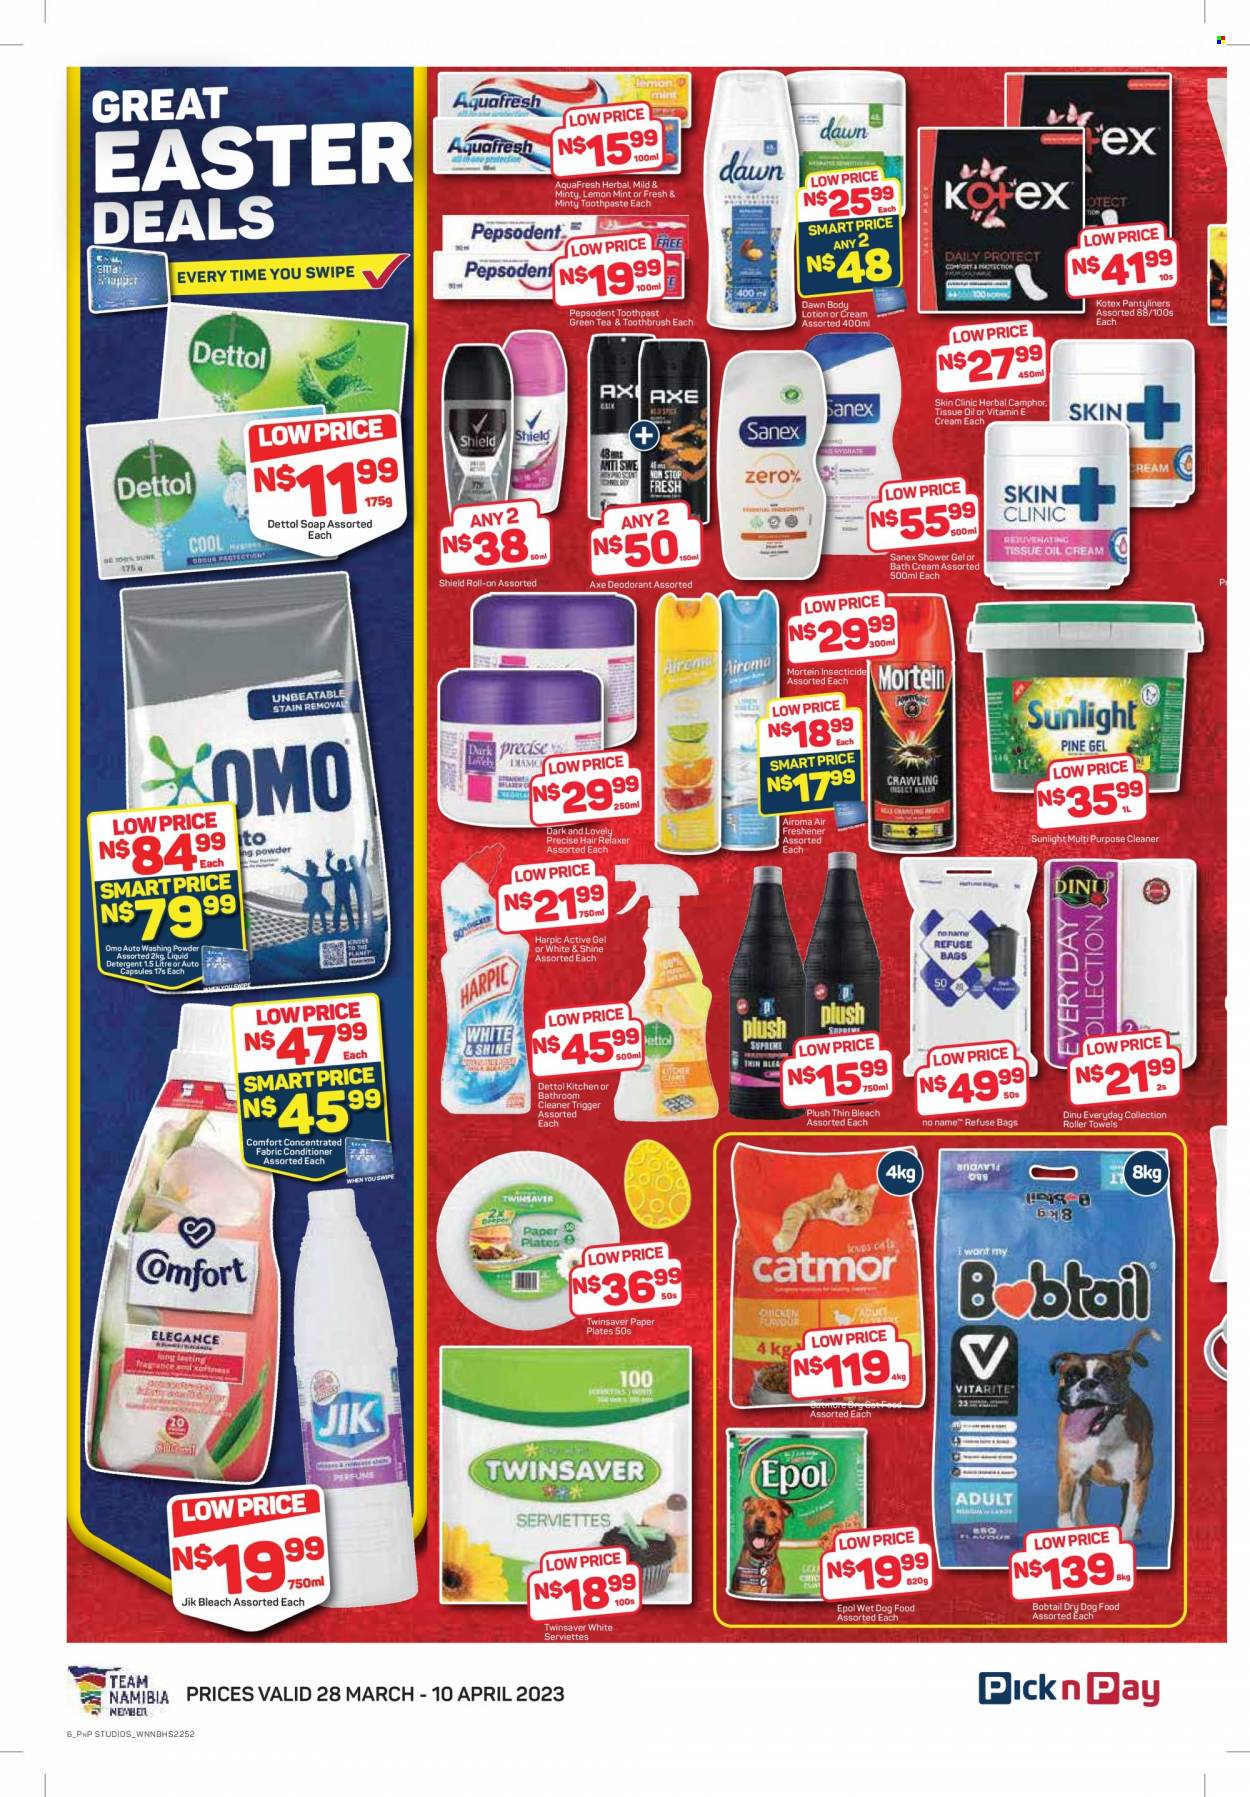 thumbnail - Pick n Pay catalogue  - 28/03/2023 - 10/04/2023 - Sales products - green tea, detergent, Dettol, bleach, cleaner, Mortein, Harpic, Omo, liquid detergent, laundry powder, Sunlight, shower gel, soap, toothbrush, toothpaste, Pepsodent, Kotex, pantyliners, Dark and Lovely, relaxer, body lotion, Axe, insecticide, animal food, cat food, dog food, wet dog food, dry dog food, dry cat food. Page 6.